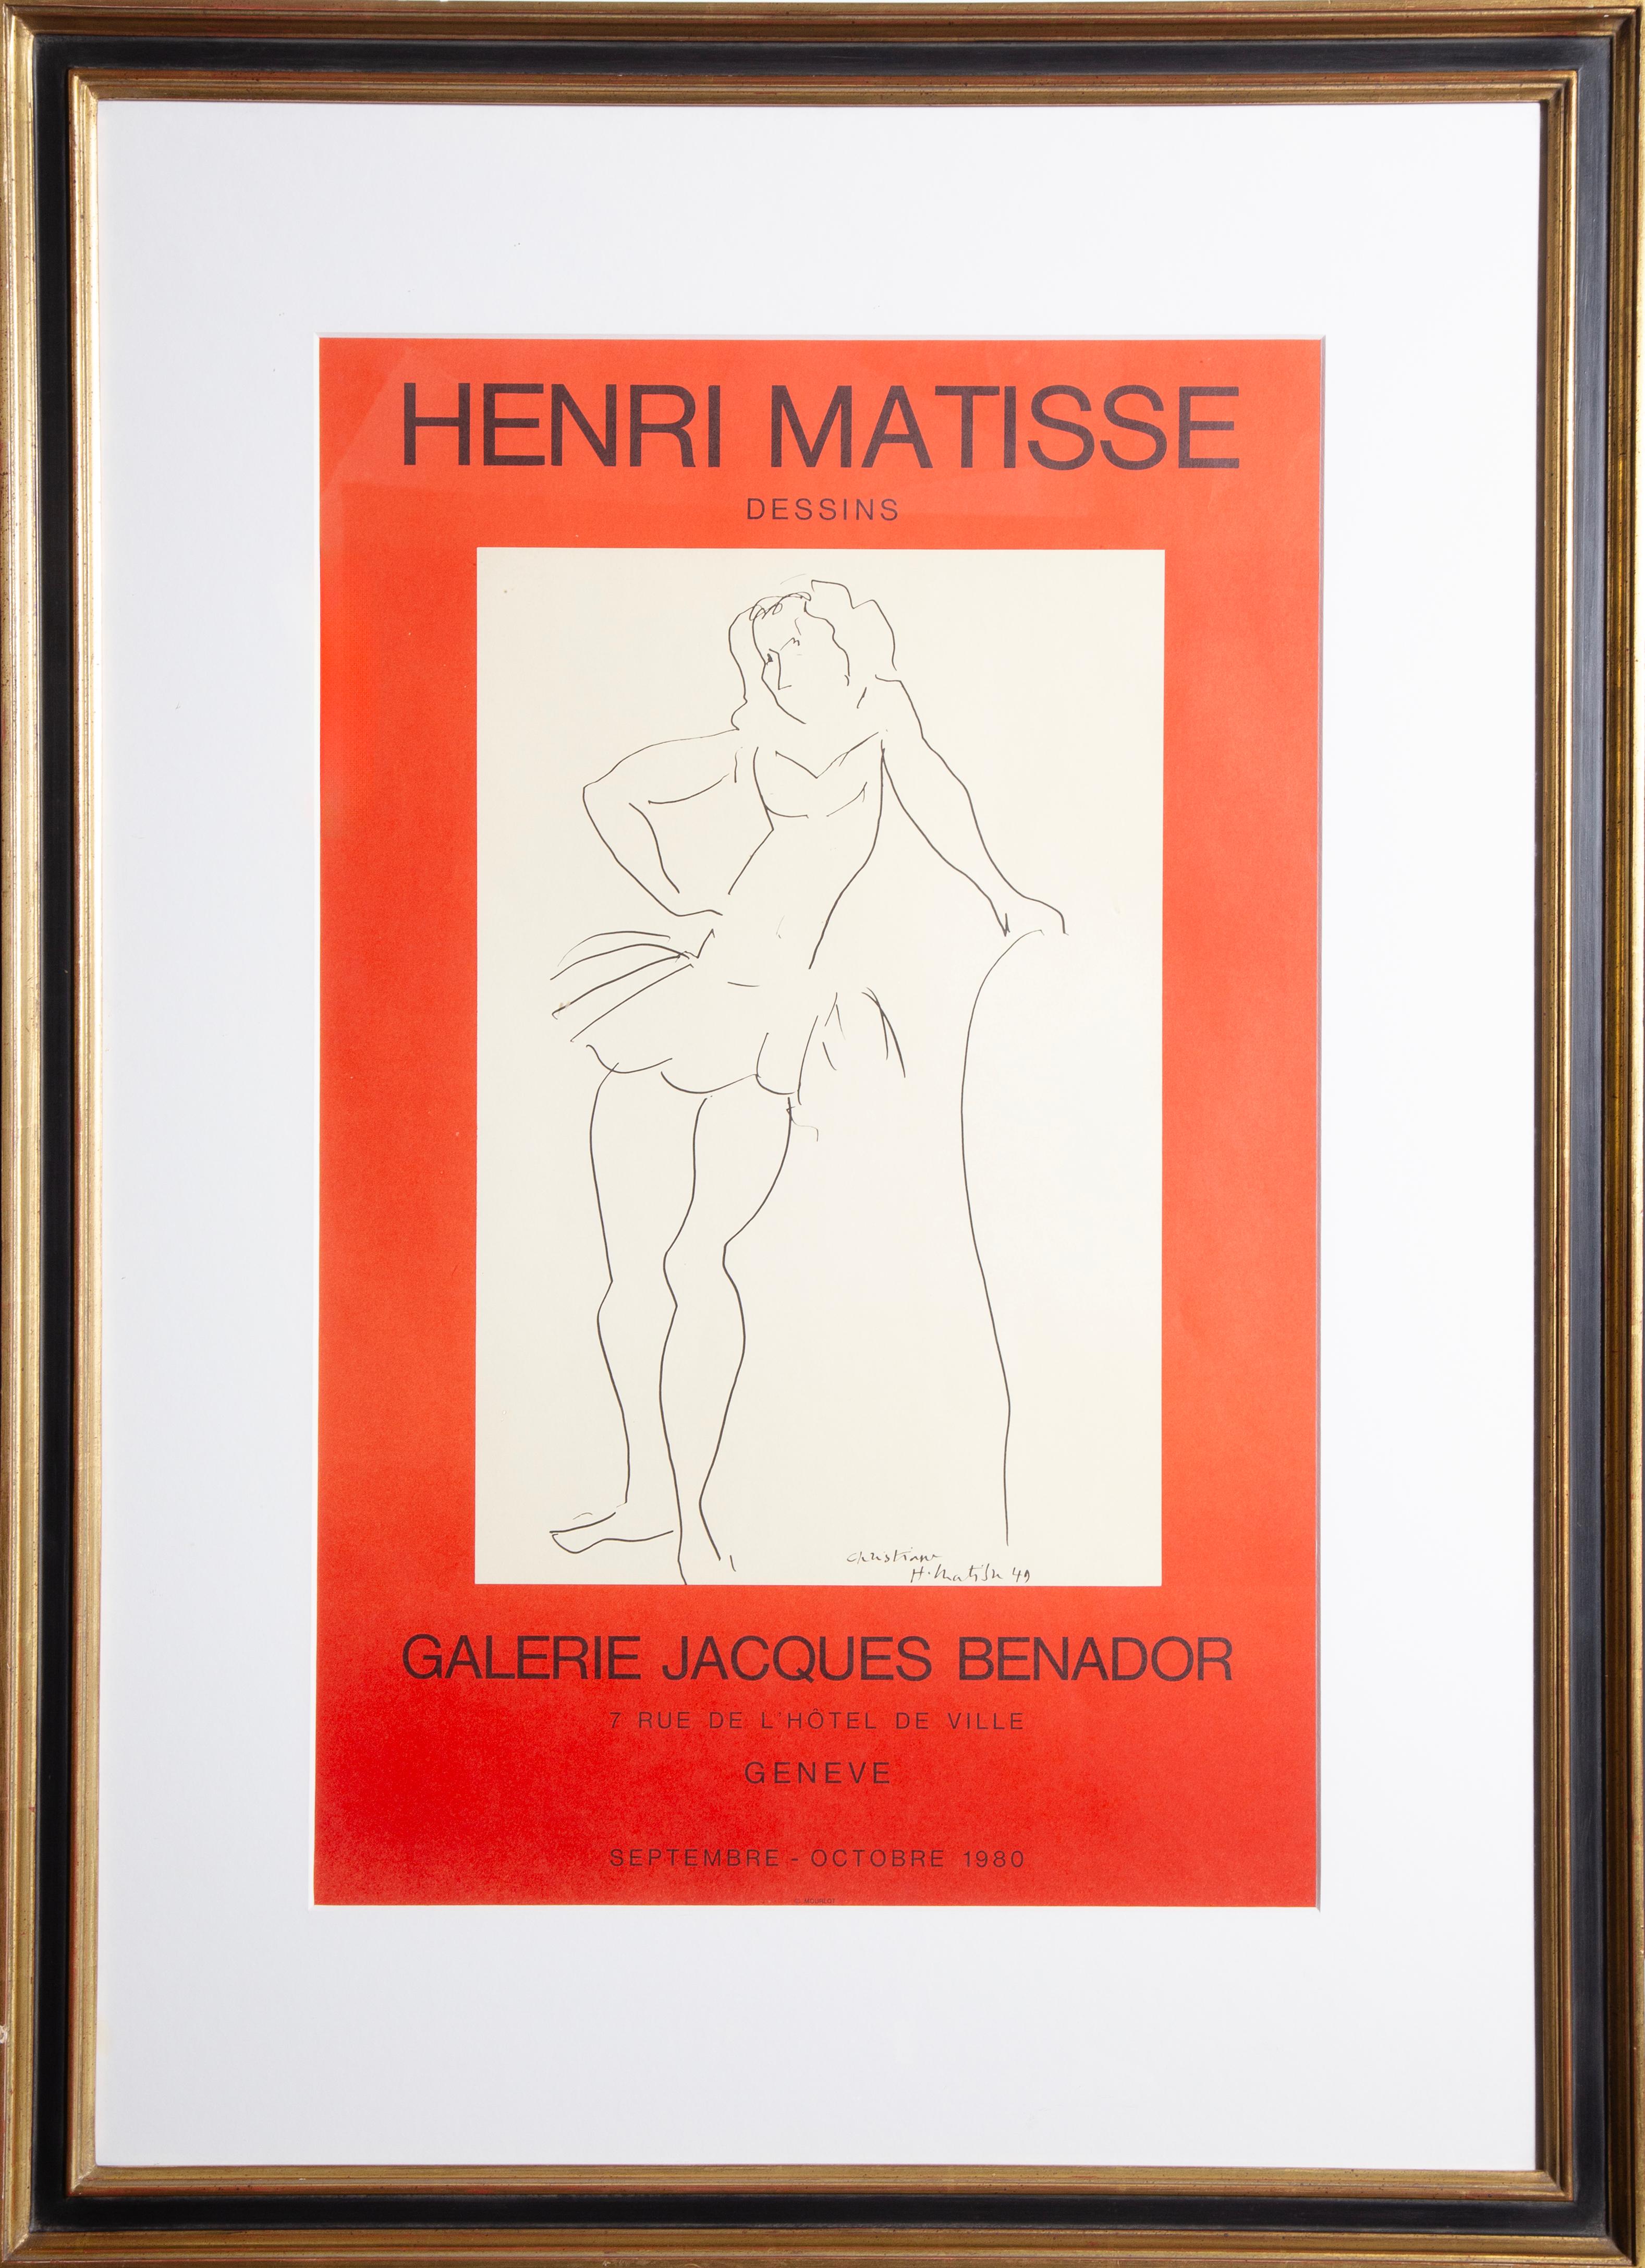 Original lithograph poster for the Matisse exhibition at the Galerie Jacques Benador, Geneva 1980. The center of the composition features an image of a drawing by Henri Matisse of a dancer in a short tutu resting against a barre.

Exhibition Poster: